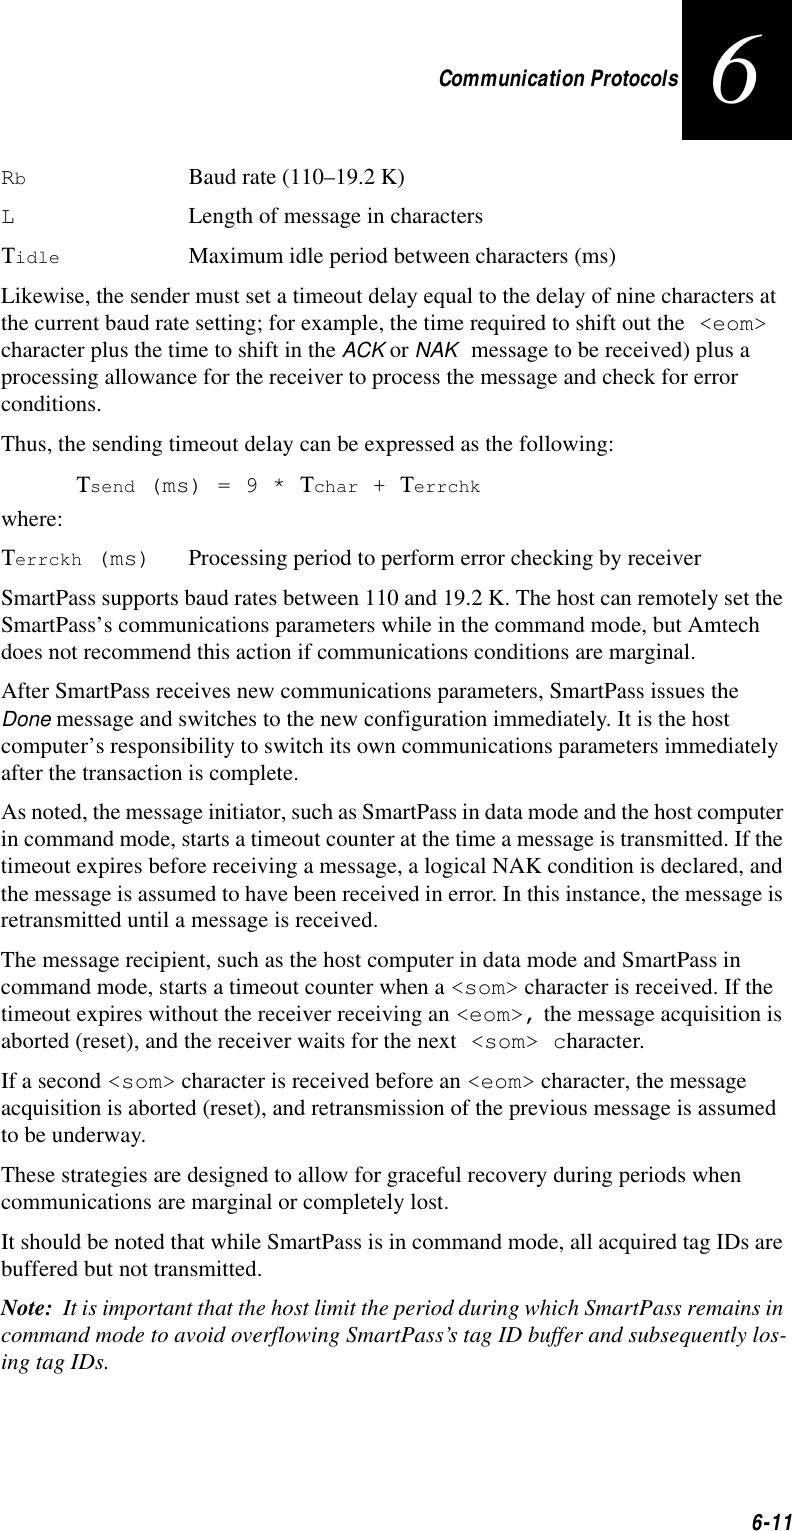 Communication Protocols6-116RbBaud rate (110–19.2 K)LLength of message in charactersΤidle Maximum idle period between characters (ms)Likewise, the sender must set a timeout delay equal to the delay of nine characters at the current baud rate setting; for example, the time required to shift out the &lt;eom&gt; character plus the time to shift in the ACK or NAK message to be received) plus a processing allowance for the receiver to process the message and check for error conditions.Thus, the sending timeout delay can be expressed as the following:Τsend (ms) = 9 * Τchar + Τerrchkwhere:Τerrckh (ms) Processing period to perform error checking by receiverSmartPass supports baud rates between 110 and 19.2 K. The host can remotely set the SmartPass’s communications parameters while in the command mode, but Amtech does not recommend this action if communications conditions are marginal.After SmartPass receives new communications parameters, SmartPass issues the Done message and switches to the new configuration immediately. It is the host computer’s responsibility to switch its own communications parameters immediately after the transaction is complete.As noted, the message initiator, such as SmartPass in data mode and the host computer in command mode, starts a timeout counter at the time a message is transmitted. If the timeout expires before receiving a message, a logical NAK condition is declared, and the message is assumed to have been received in error. In this instance, the message is retransmitted until a message is received.The message recipient, such as the host computer in data mode and SmartPass in command mode, starts a timeout counter when a &lt;som&gt; character is received. If the timeout expires without the receiver receiving an &lt;eom&gt;, the message acquisition is aborted (reset), and the receiver waits for the next &lt;som&gt; character.If a second &lt;som&gt; character is received before an &lt;eom&gt; character, the message acquisition is aborted (reset), and retransmission of the previous message is assumed to be underway.These strategies are designed to allow for graceful recovery during periods when communications are marginal or completely lost.It should be noted that while SmartPass is in command mode, all acquired tag IDs are buffered but not transmitted.Note:  It is important that the host limit the period during which SmartPass remains in command mode to avoid overflowing SmartPass’s tag ID buffer and subsequently los-ing tag IDs.